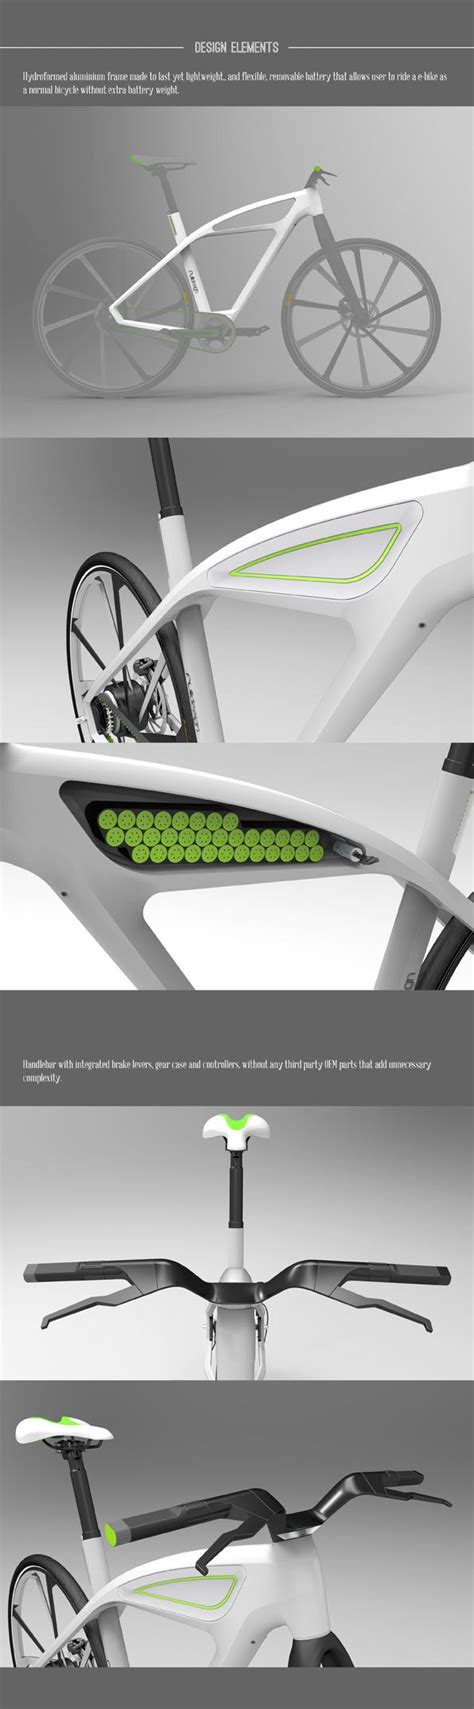 Pin By 40 Up And Counting On Techcrunch Electric Bicycle Design Bike